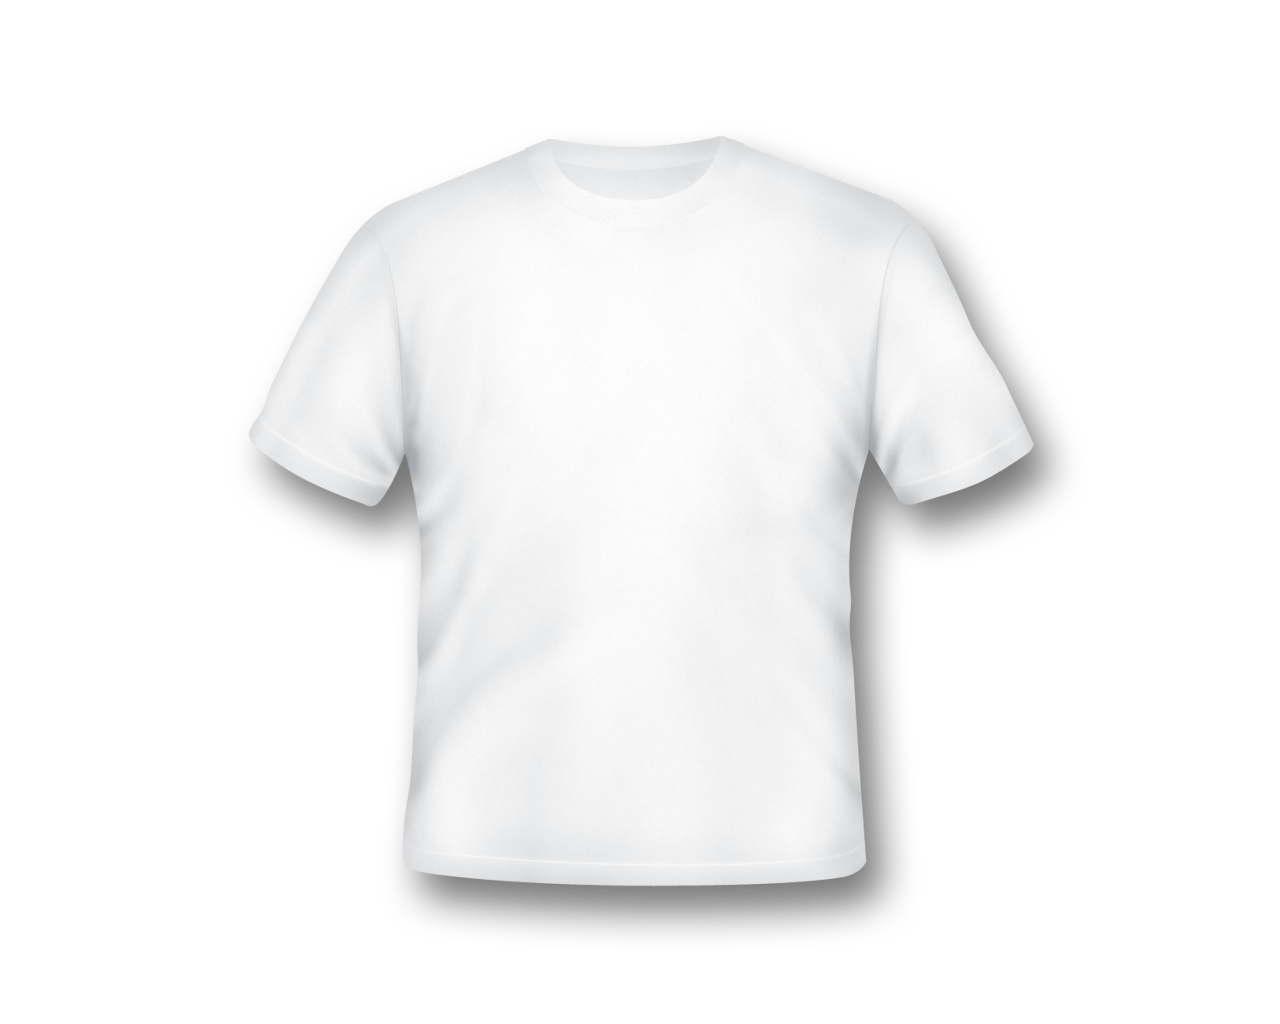 Download Blank White T-Shirt Template HQ PNG Image | FreePNGImg